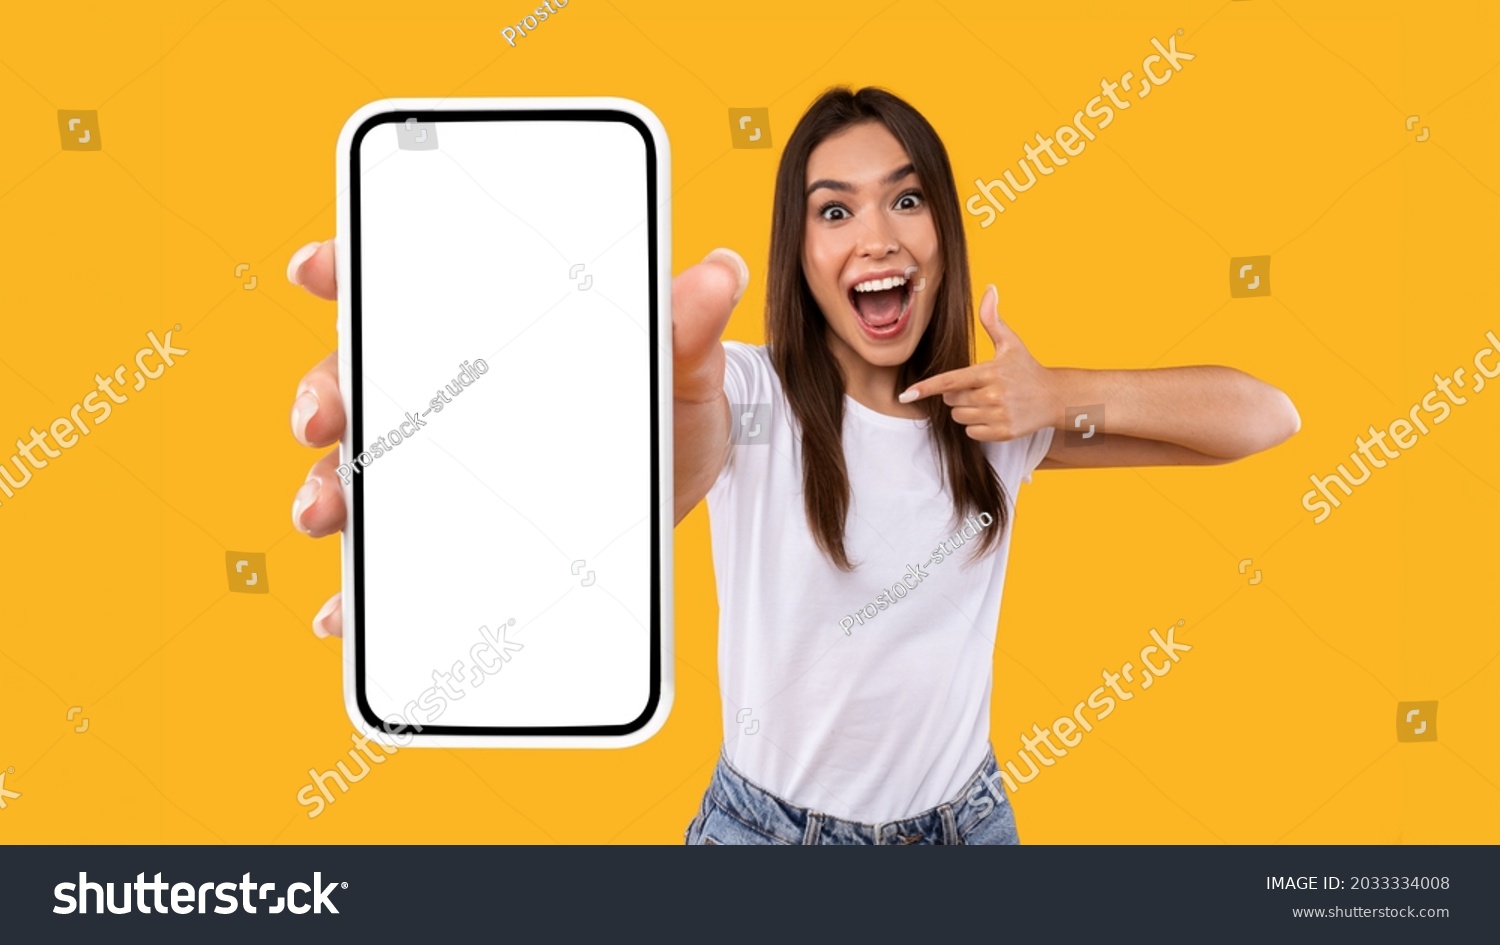 Great Mobile Offer. Excited Lady Pointing Finger At Smartphone In Her Hand, Emotionally Reacting To New App, Overjoyed Millennial Woman Standing Isolated Over Orange Studio Background, Panorama #2033334008